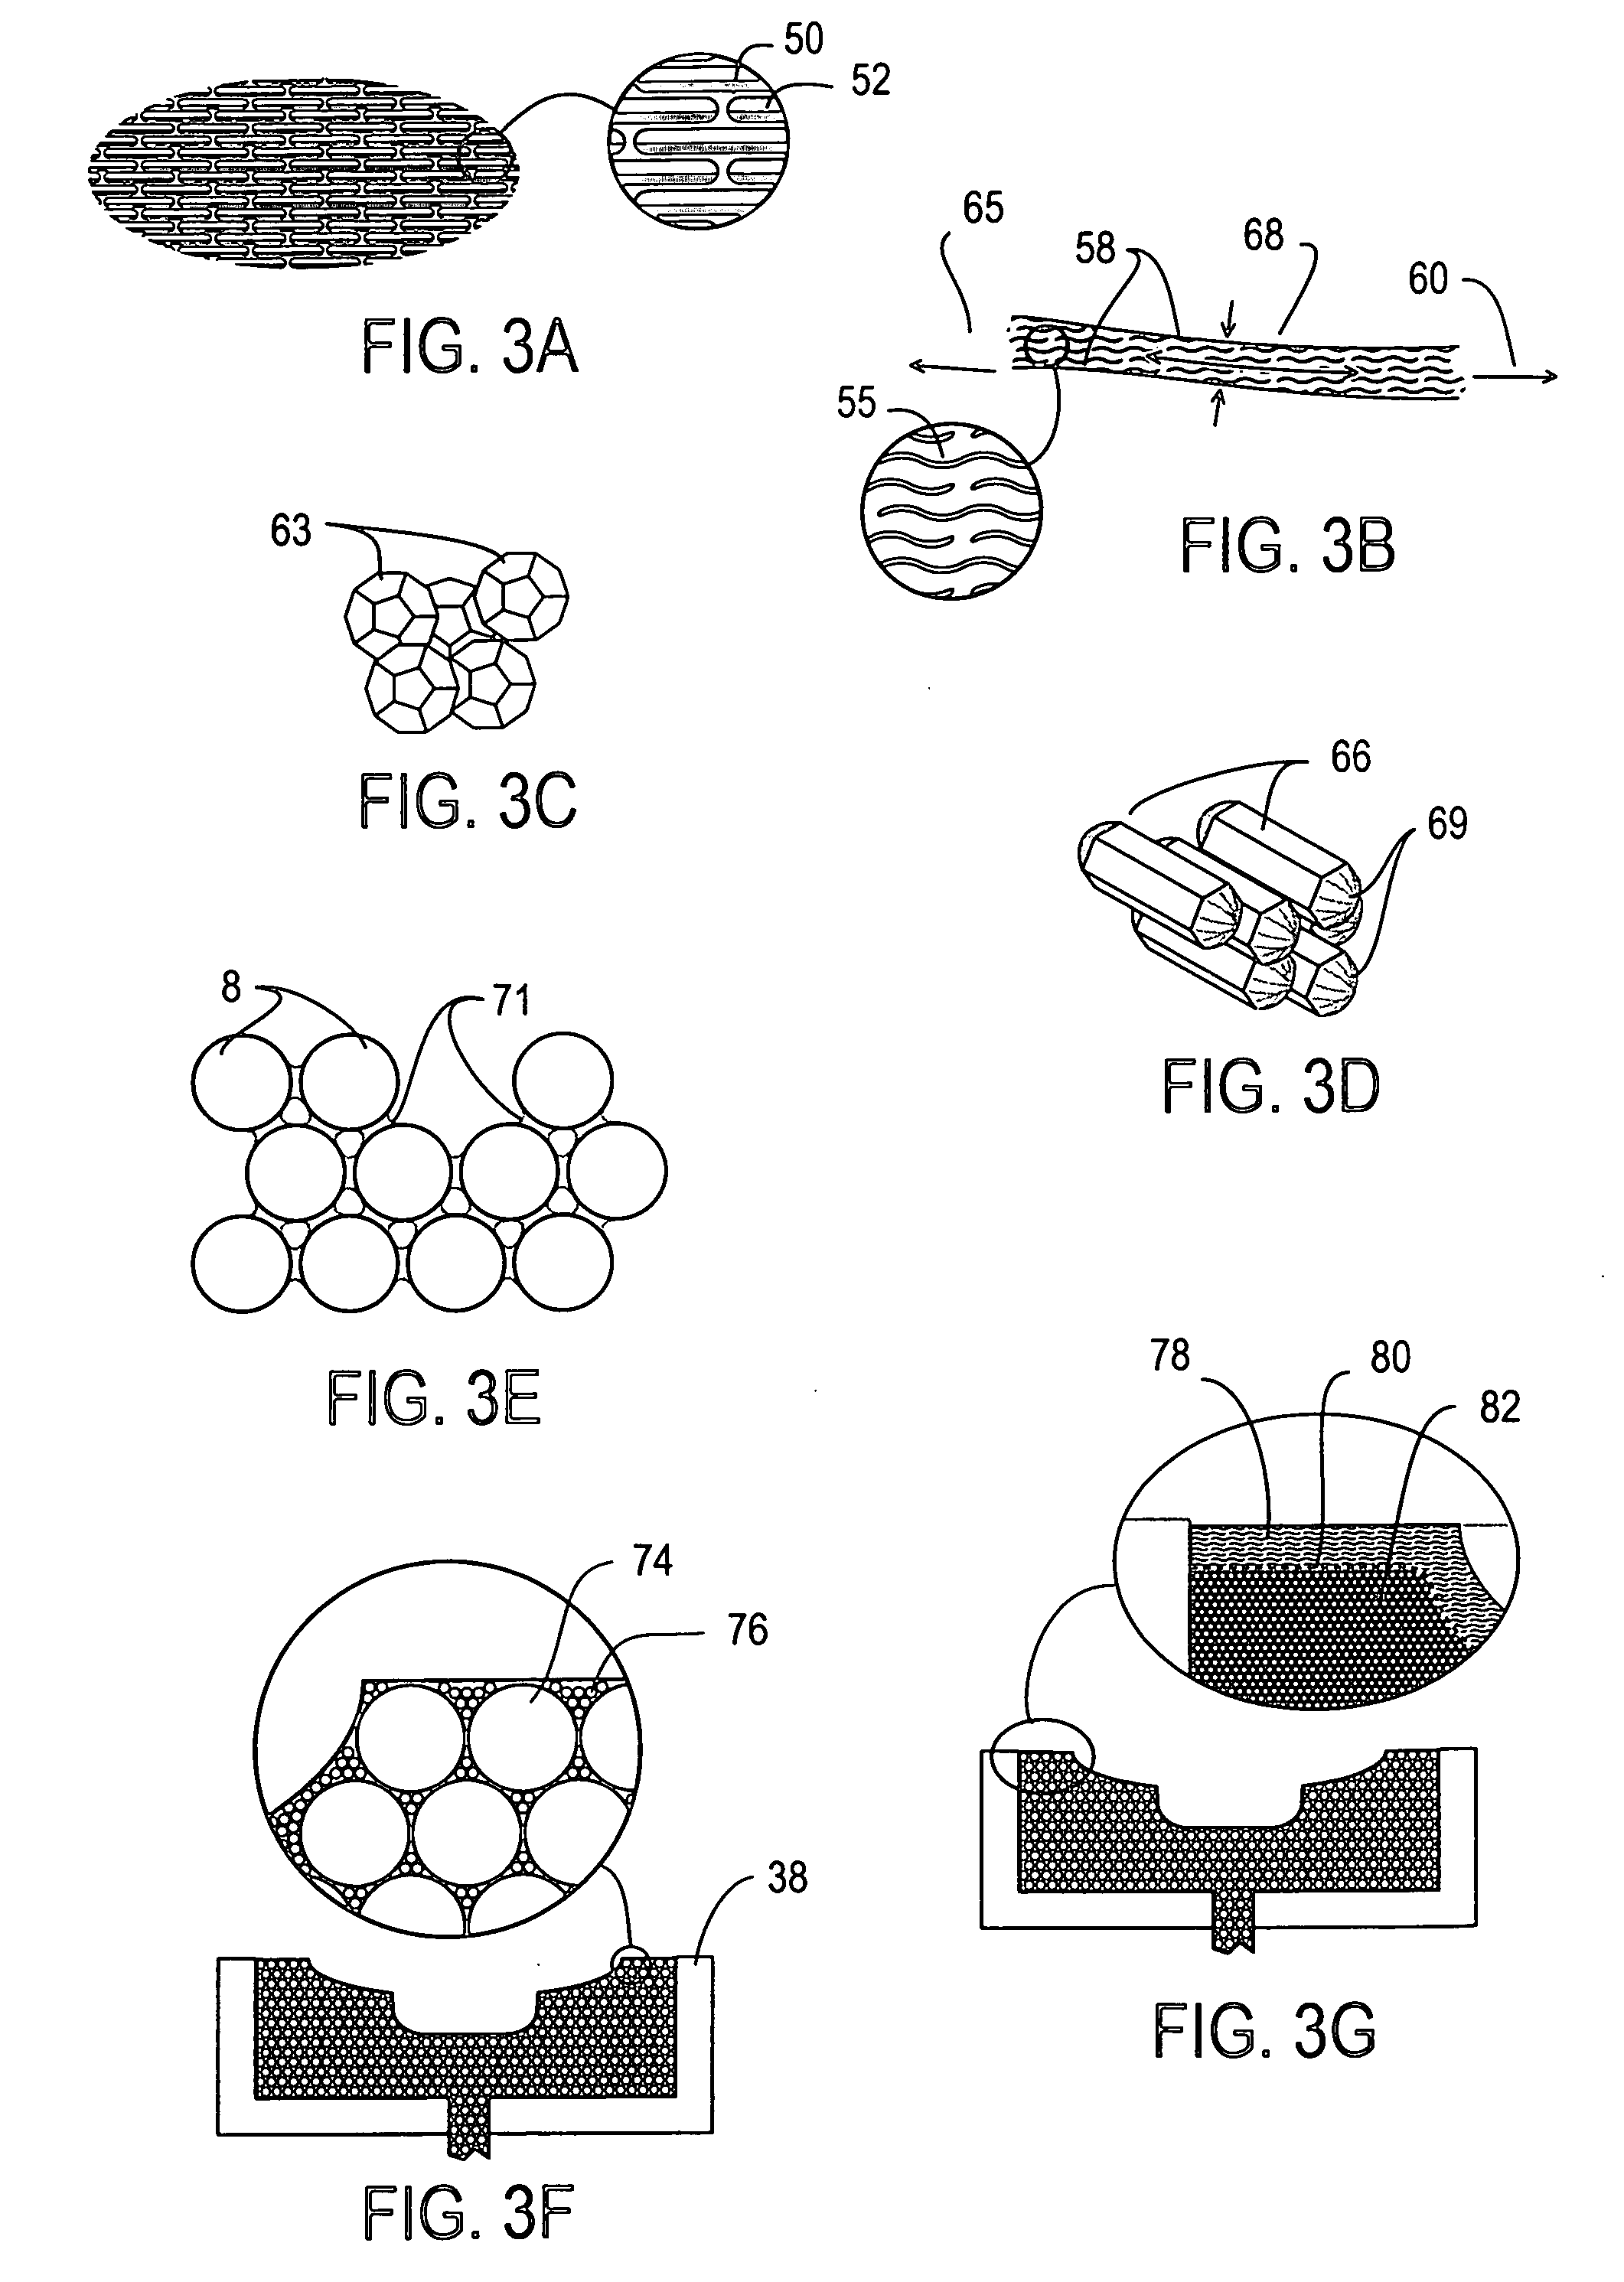 Use of state-change materials in reformable shapes, templates or tooling